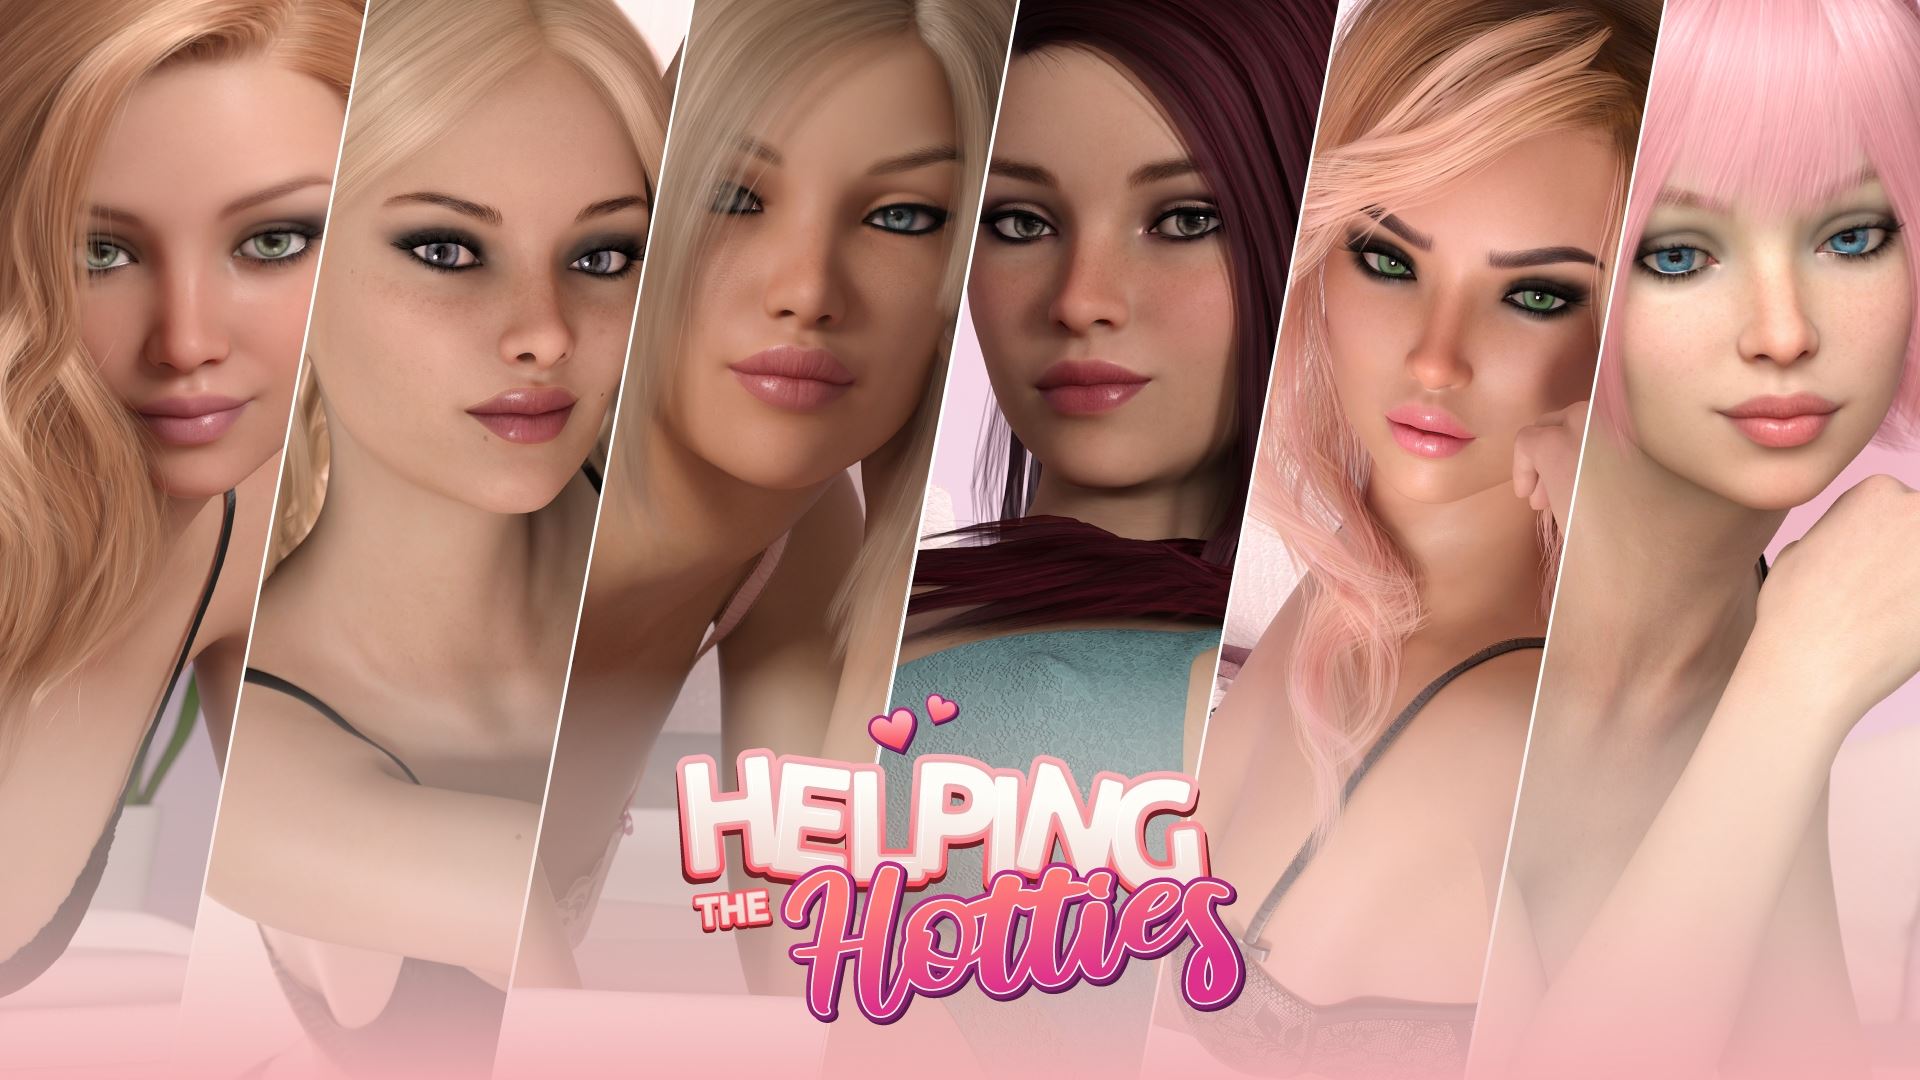 Xxx Com V - Helping The Hotties Ren'Py Porn Sex Game v.1.0 Download for Windows, MacOS,  Linux, Android